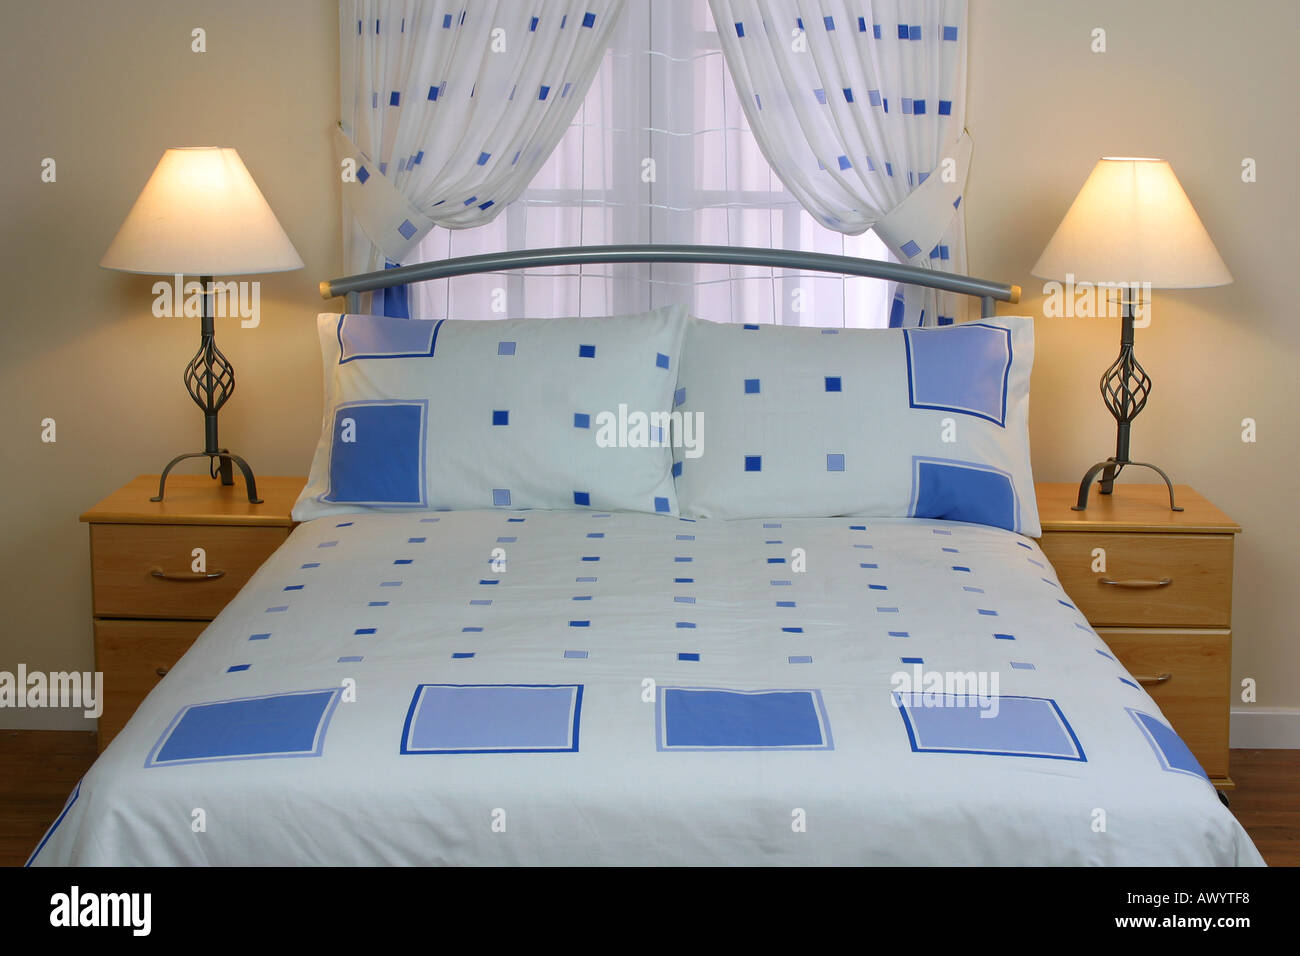 Duvet cover and bed linen on display in store Stock Photo